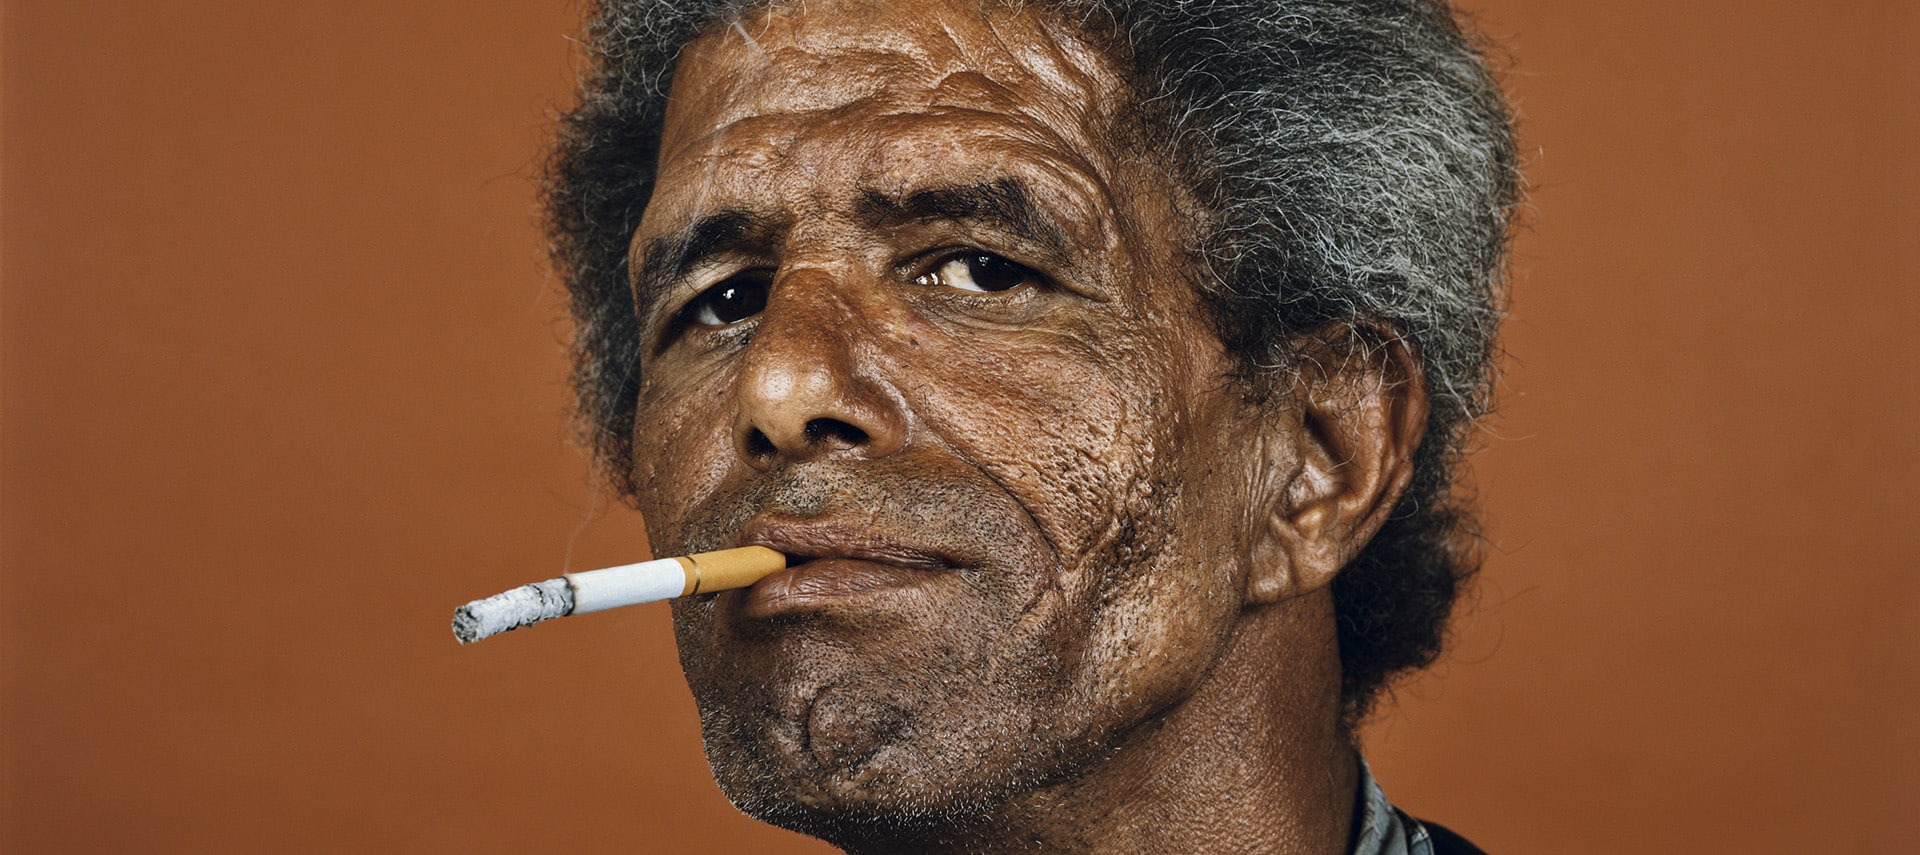 Pieter Hugo: The World Through the Eyes of Others